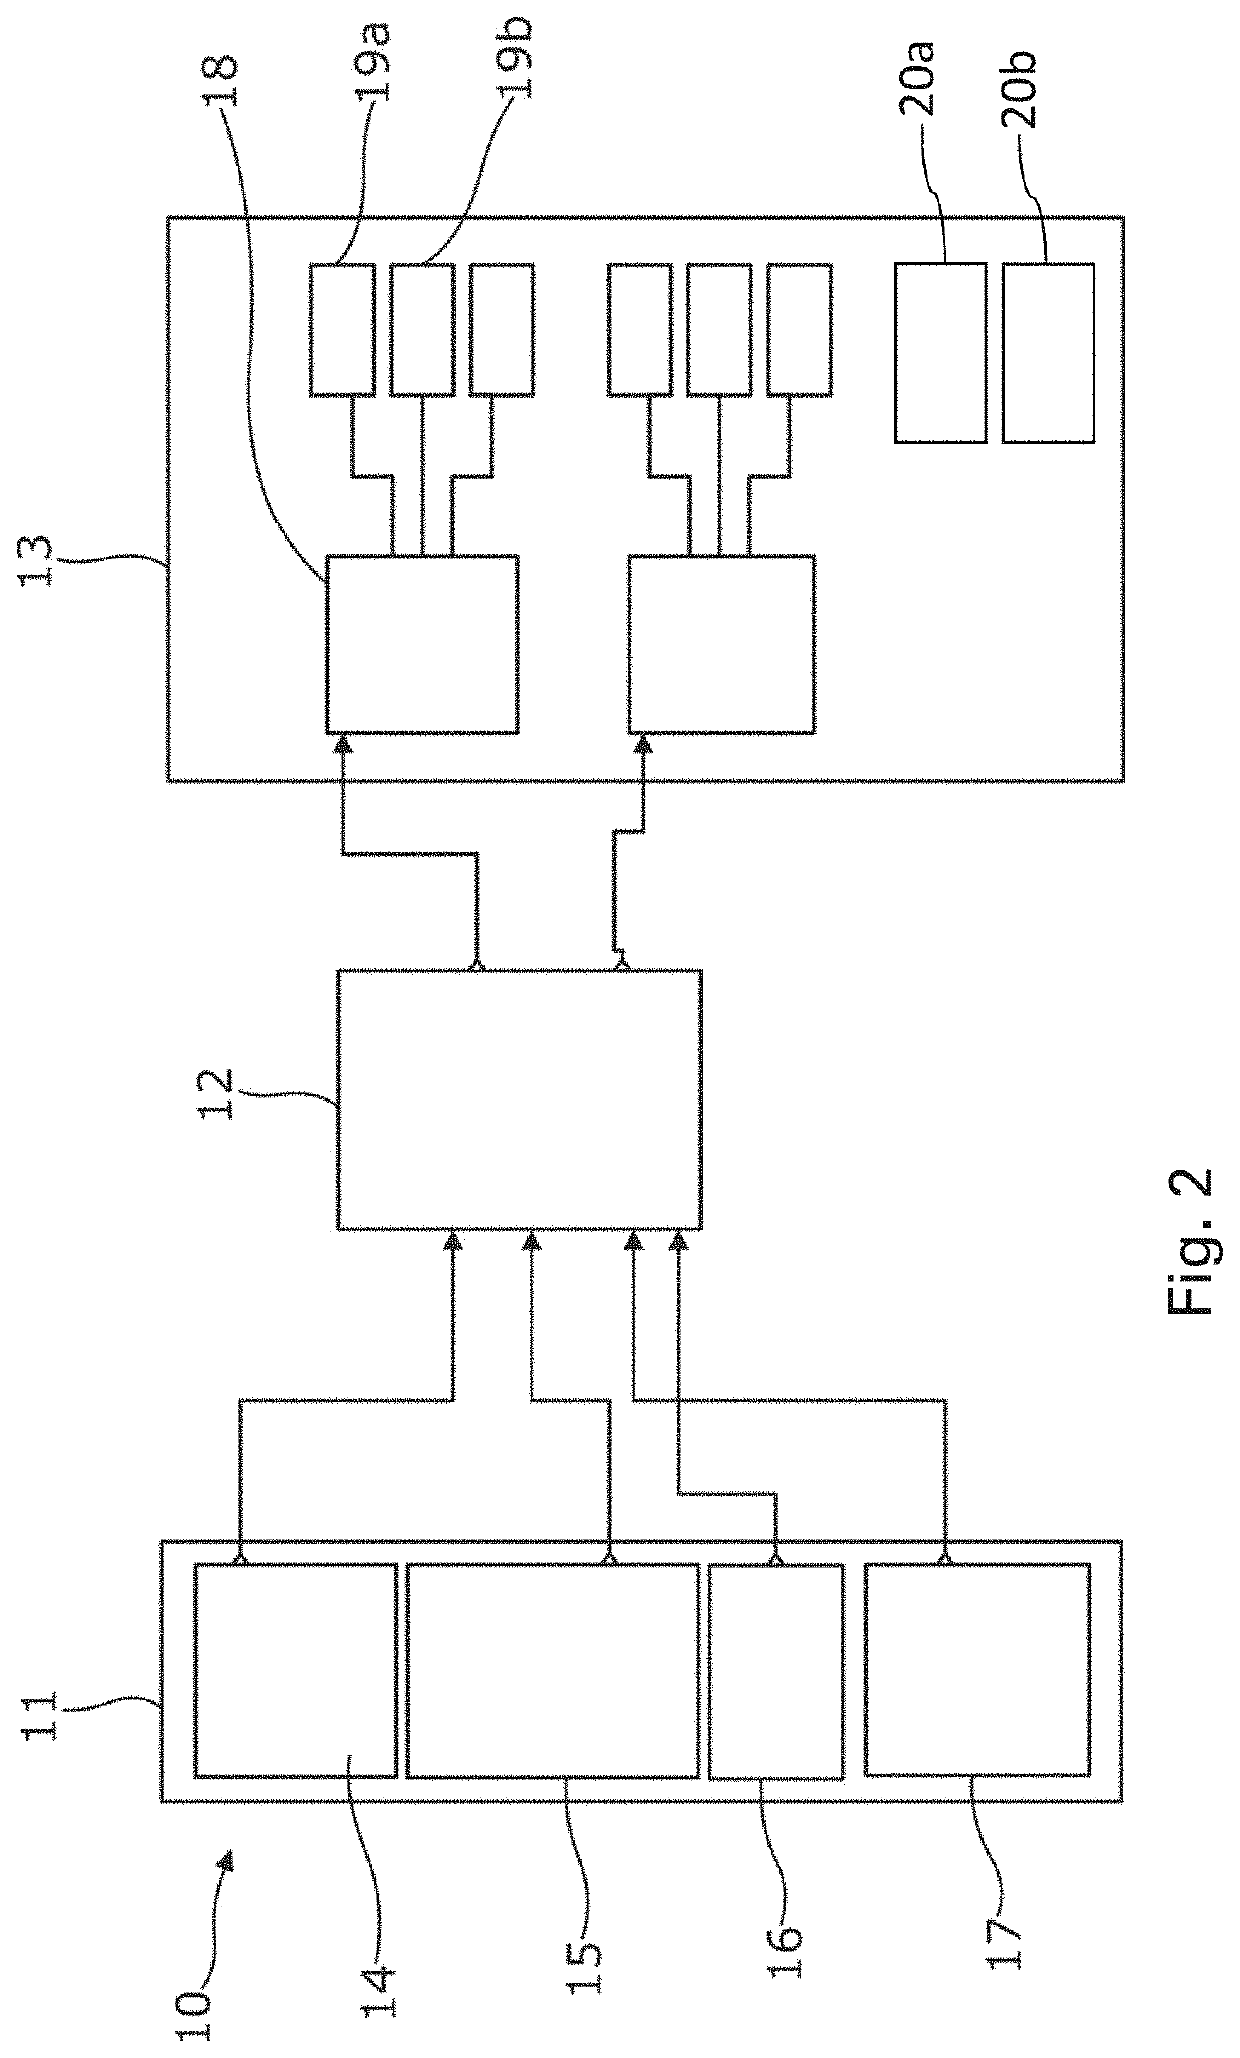 Method, System and Software for Selecting an E/E Arrangement